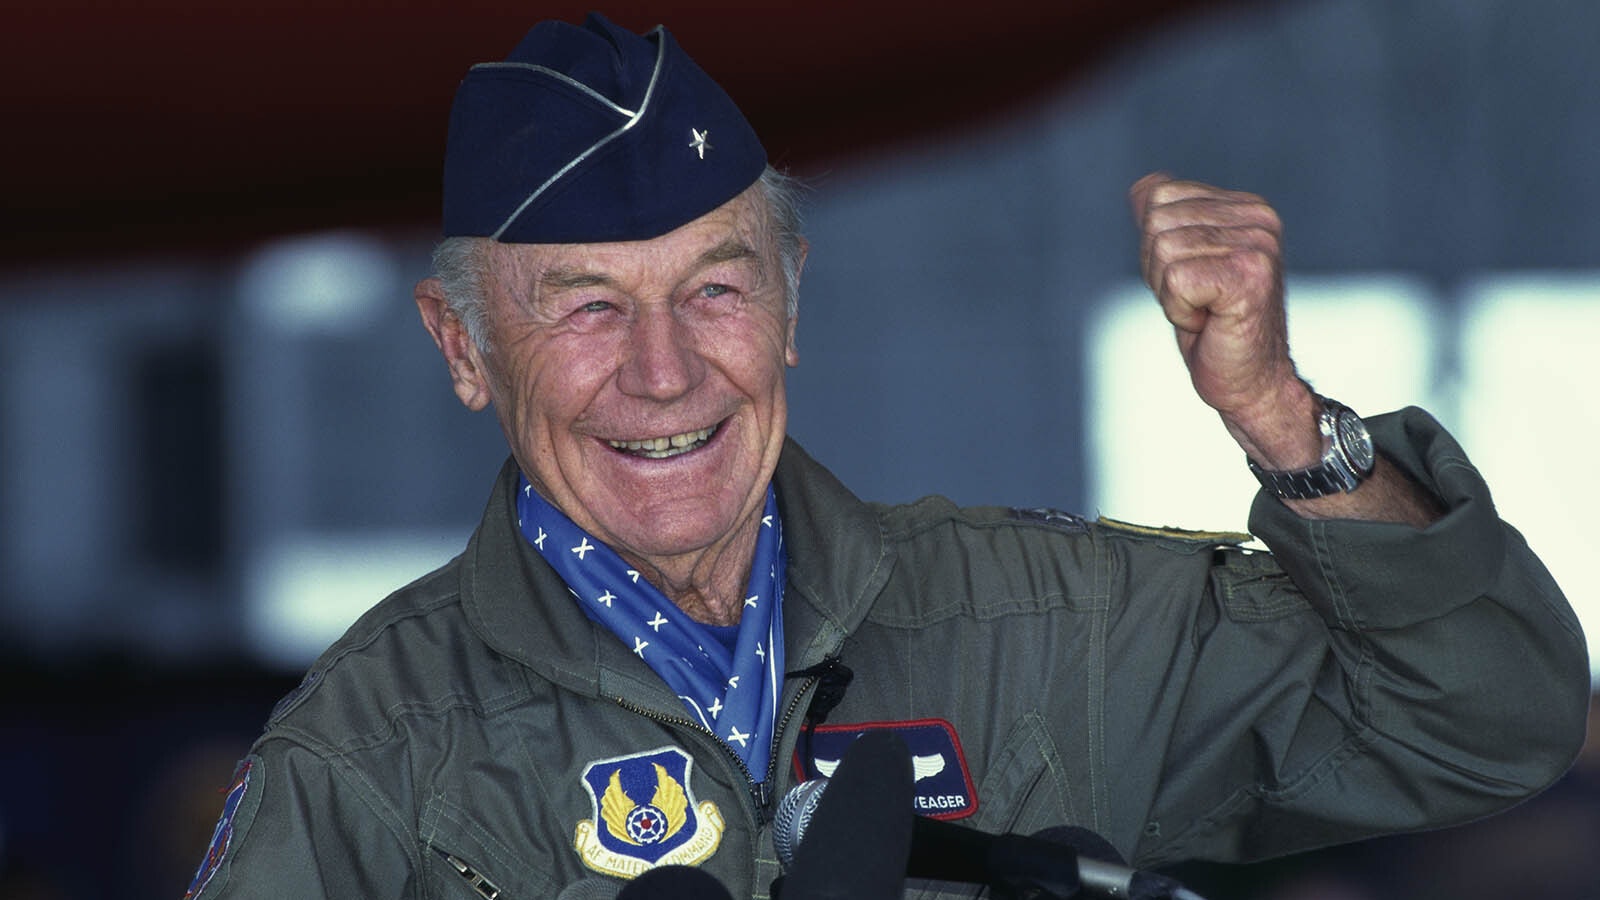 Chuck Yeager during a press conference at Edwards Air Force Base during the 50th anniversary celebration of his Oct. 14, 1947, Bell X-1 flight, in which he became the first man to break the sound barrier. Yeager again flew at the speed of sound, only this time in a McDonnell Douglas F-15 Eagle.